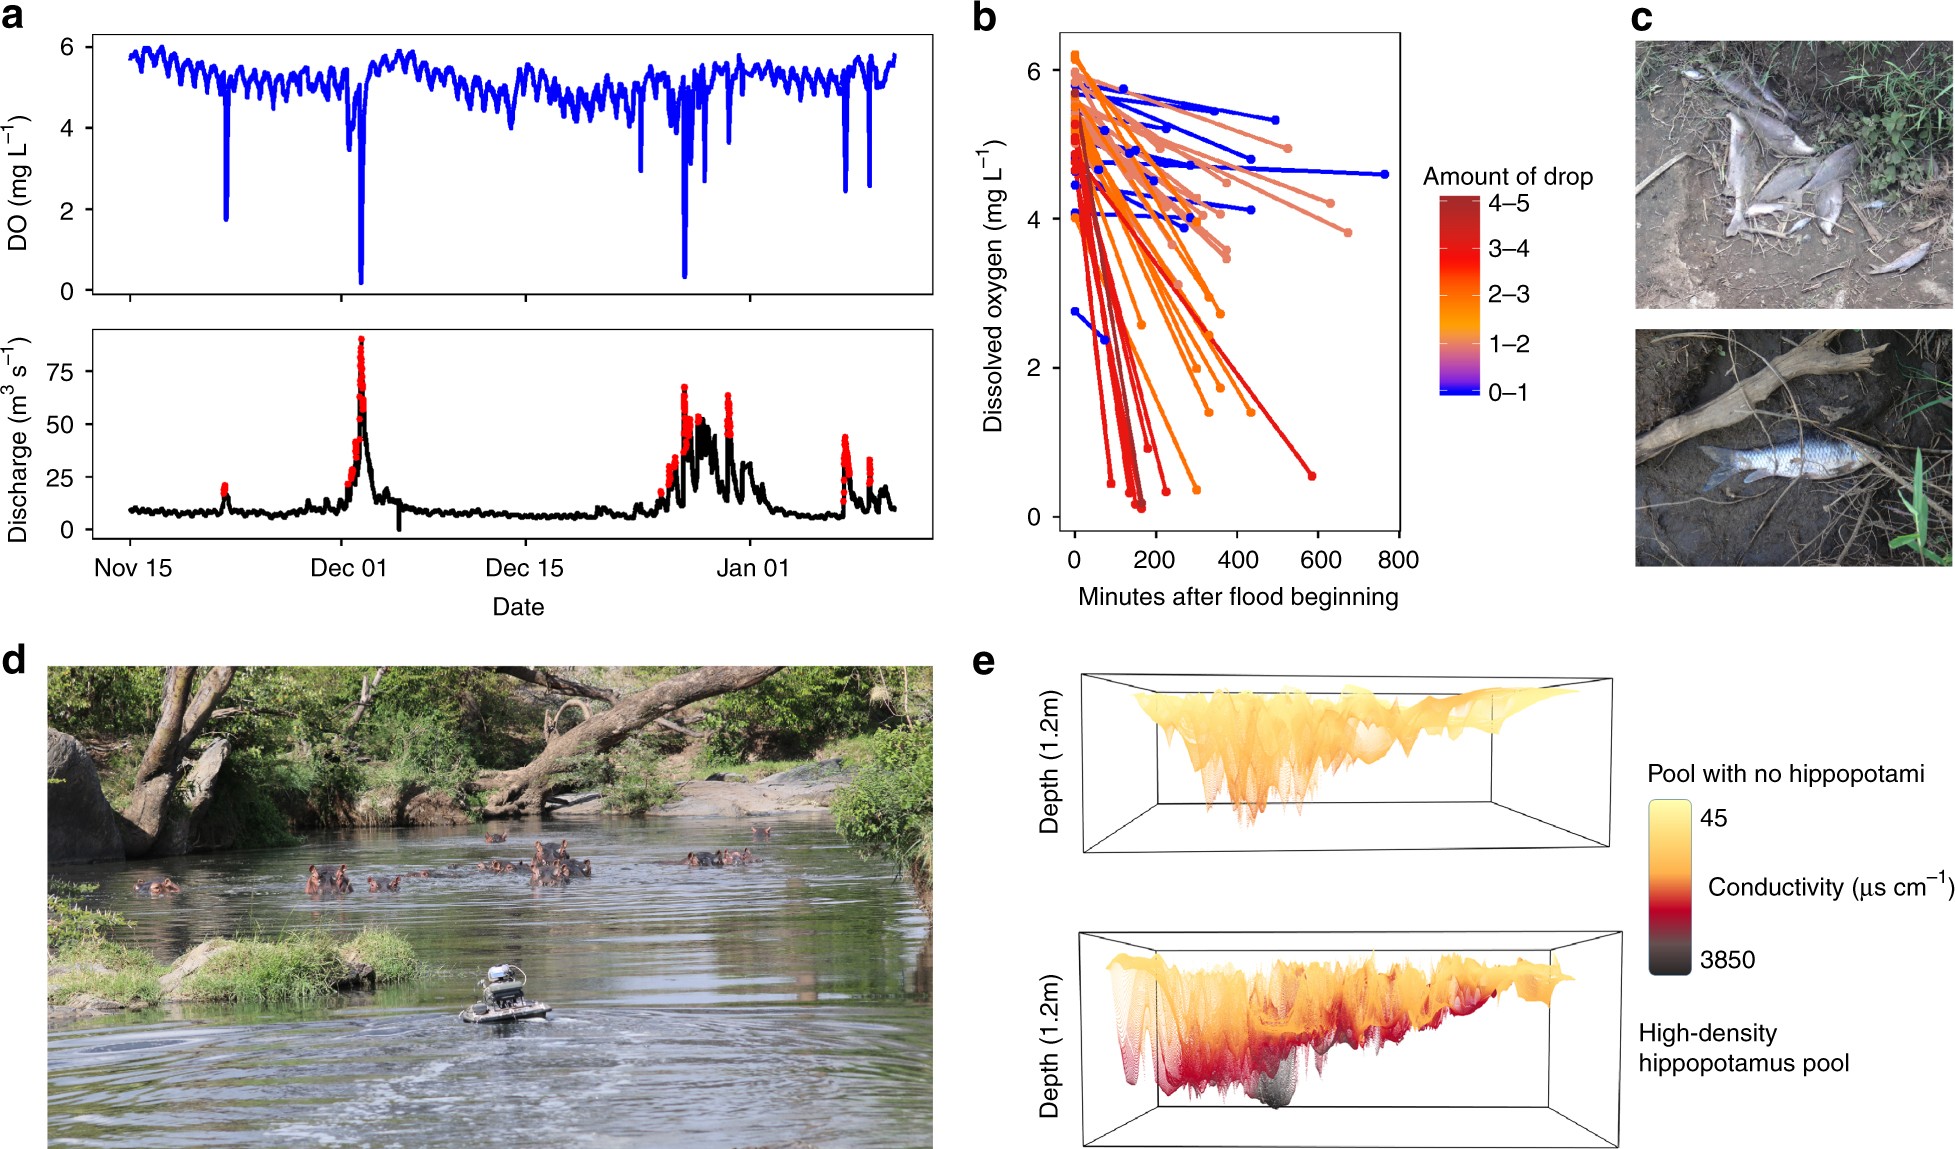 Organic matter loading by hippopotami causes subsidy overload resulting in  downstream hypoxia and fish kills | Nature Communications